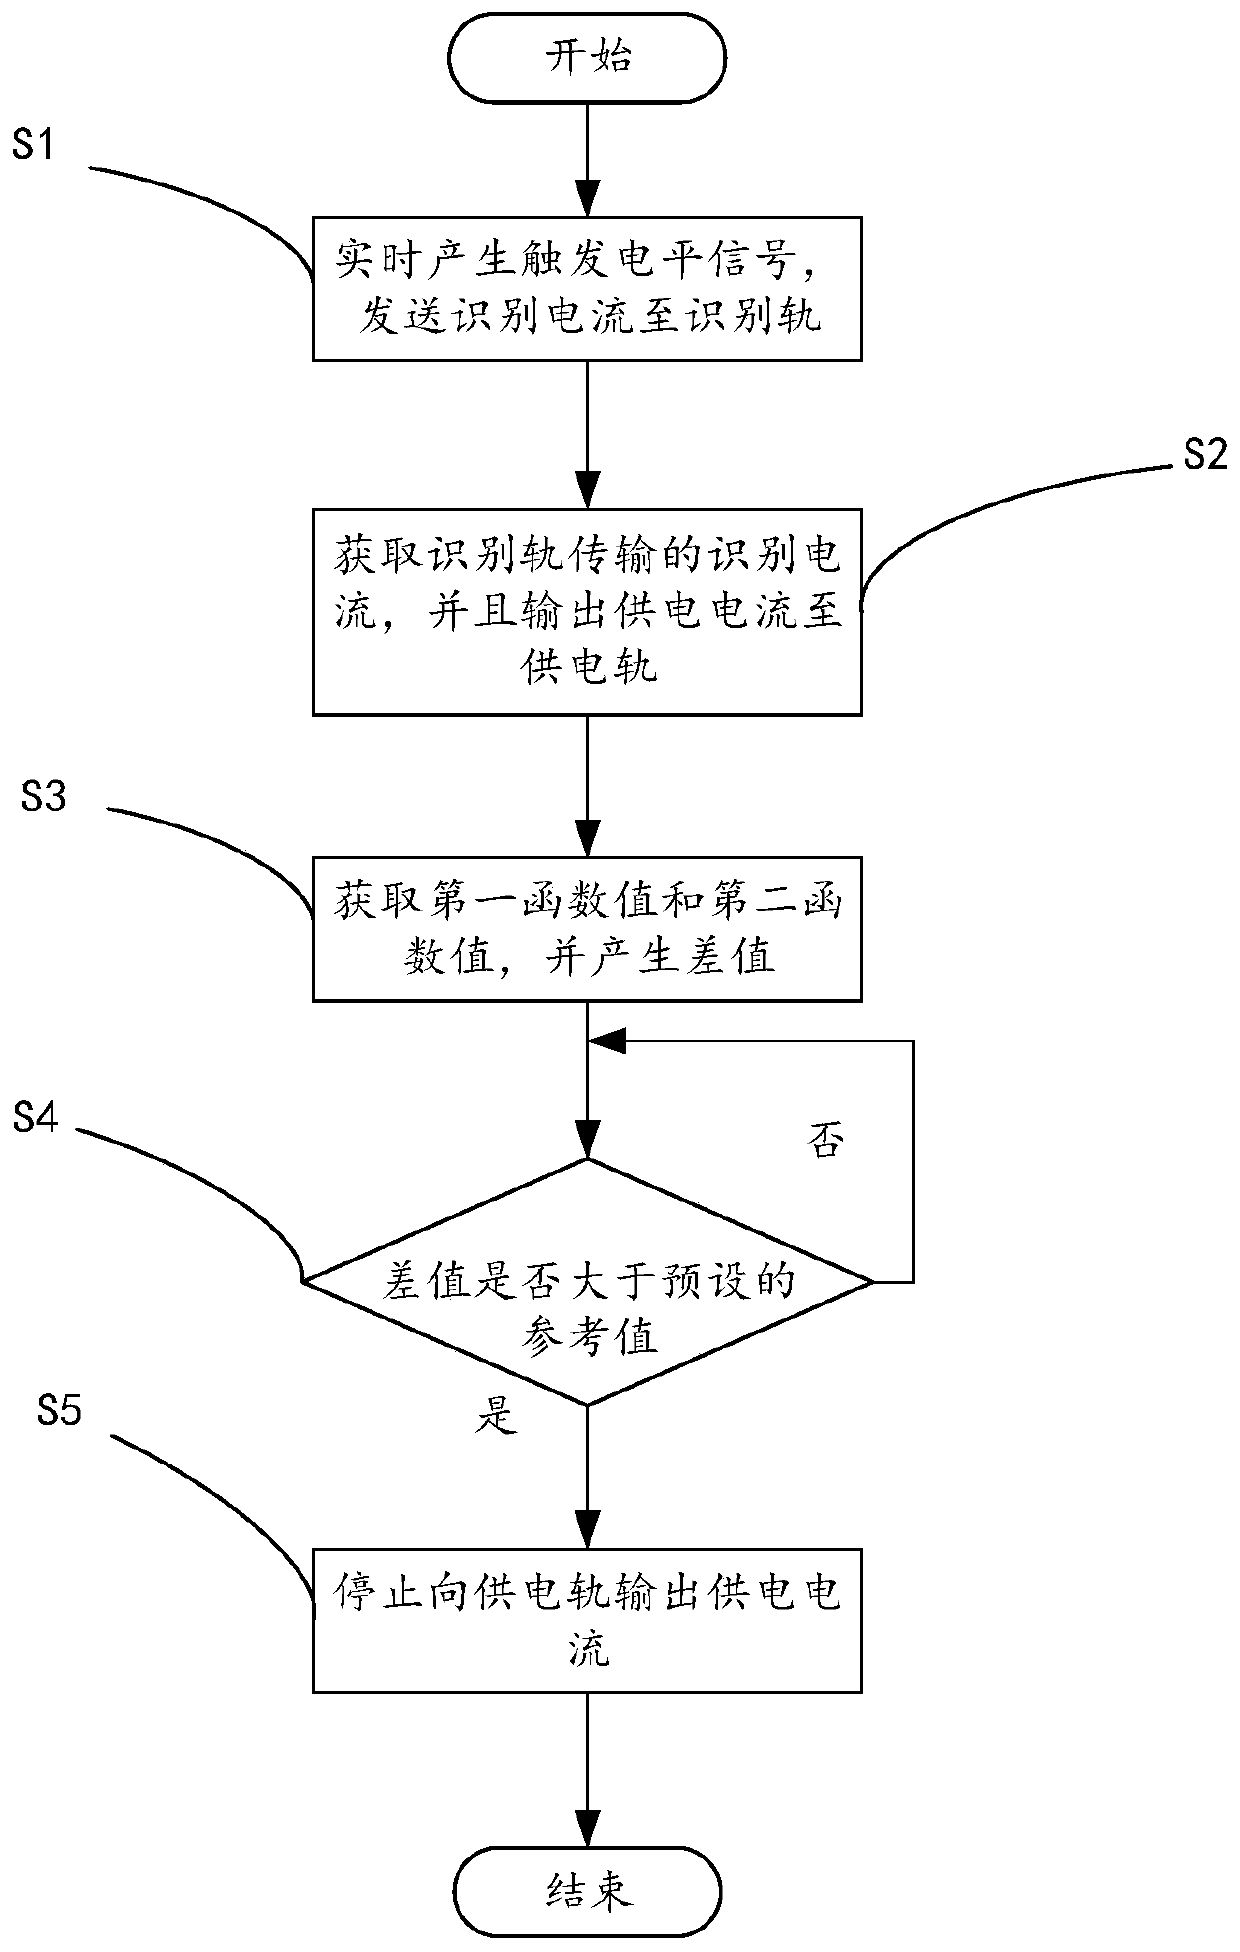 Ground power supply method and device for rail transit based on digital signal recognition